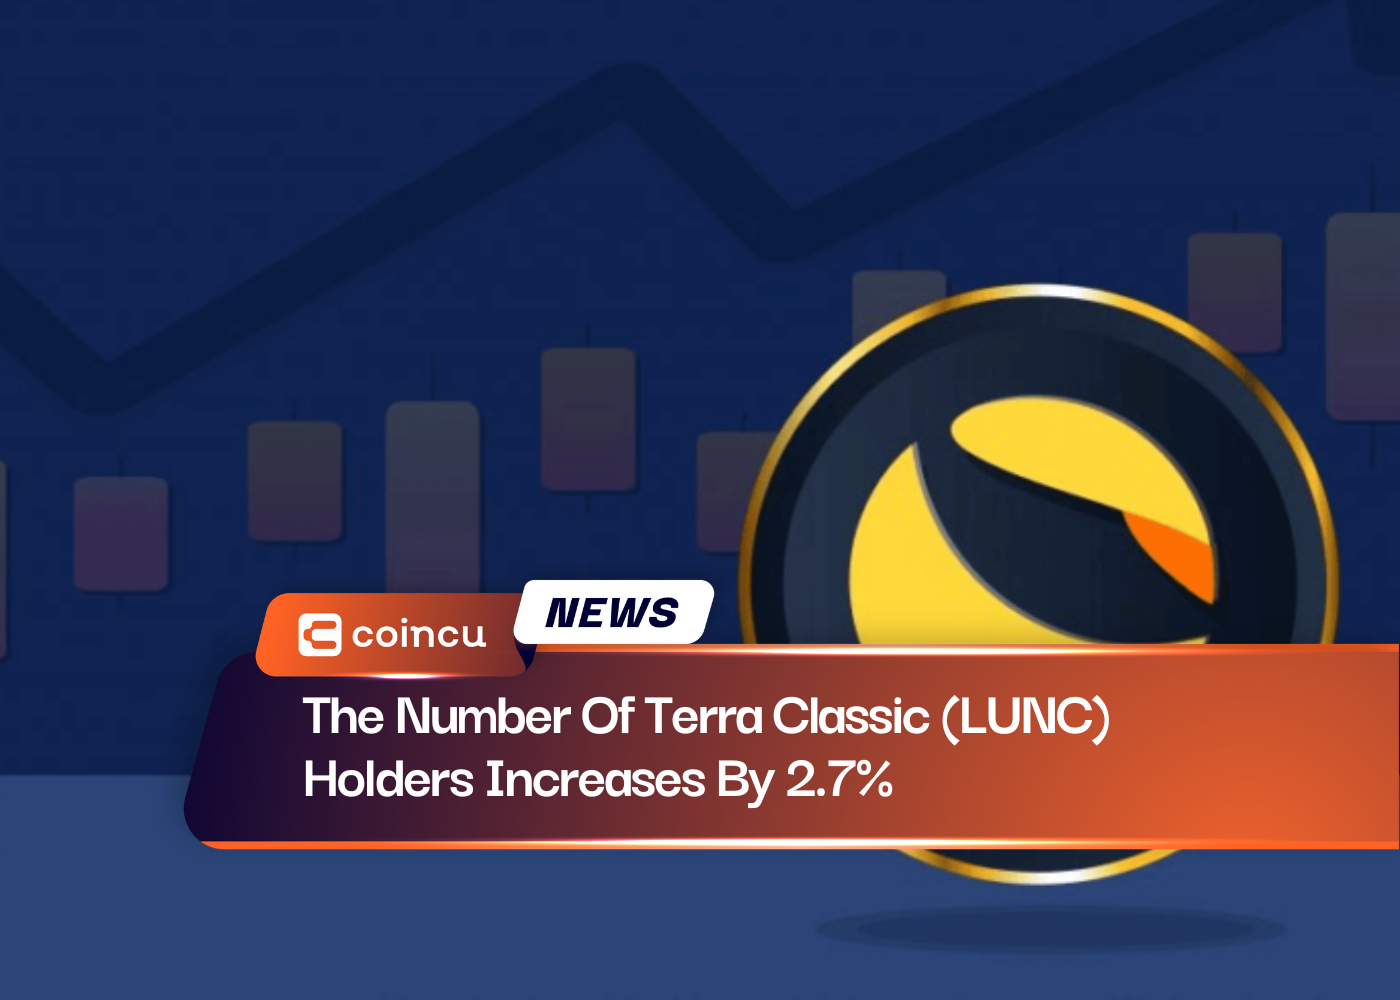 The Number Of Terra Classic (LUNC) Holders Increases By 2.7%